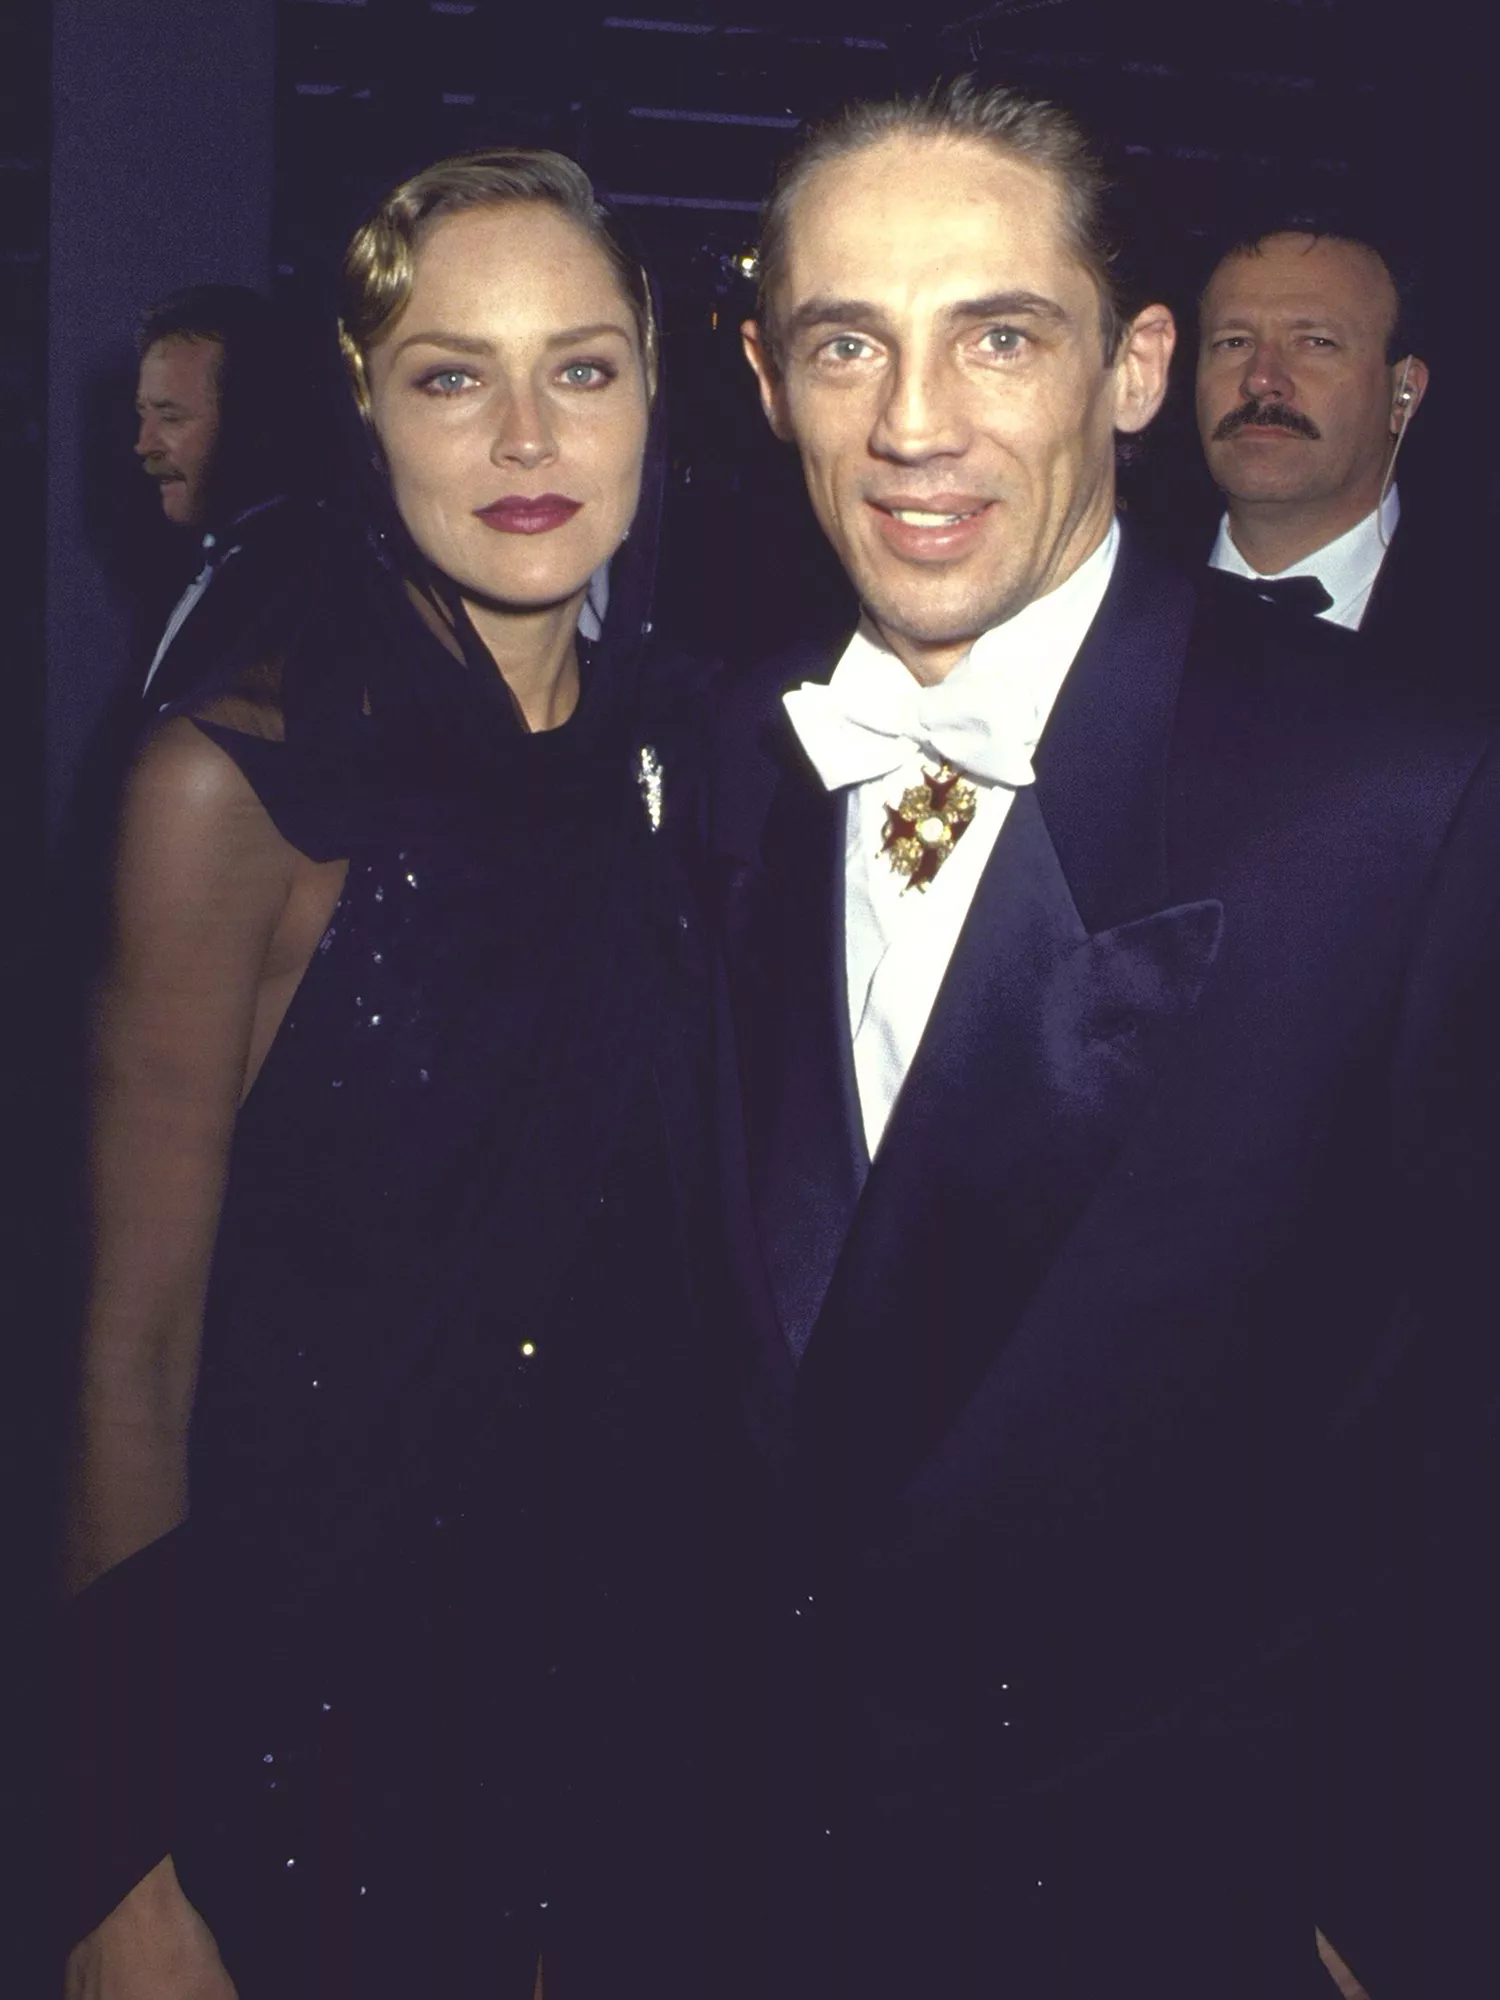 Sharon Stone and brother Michael Stone.